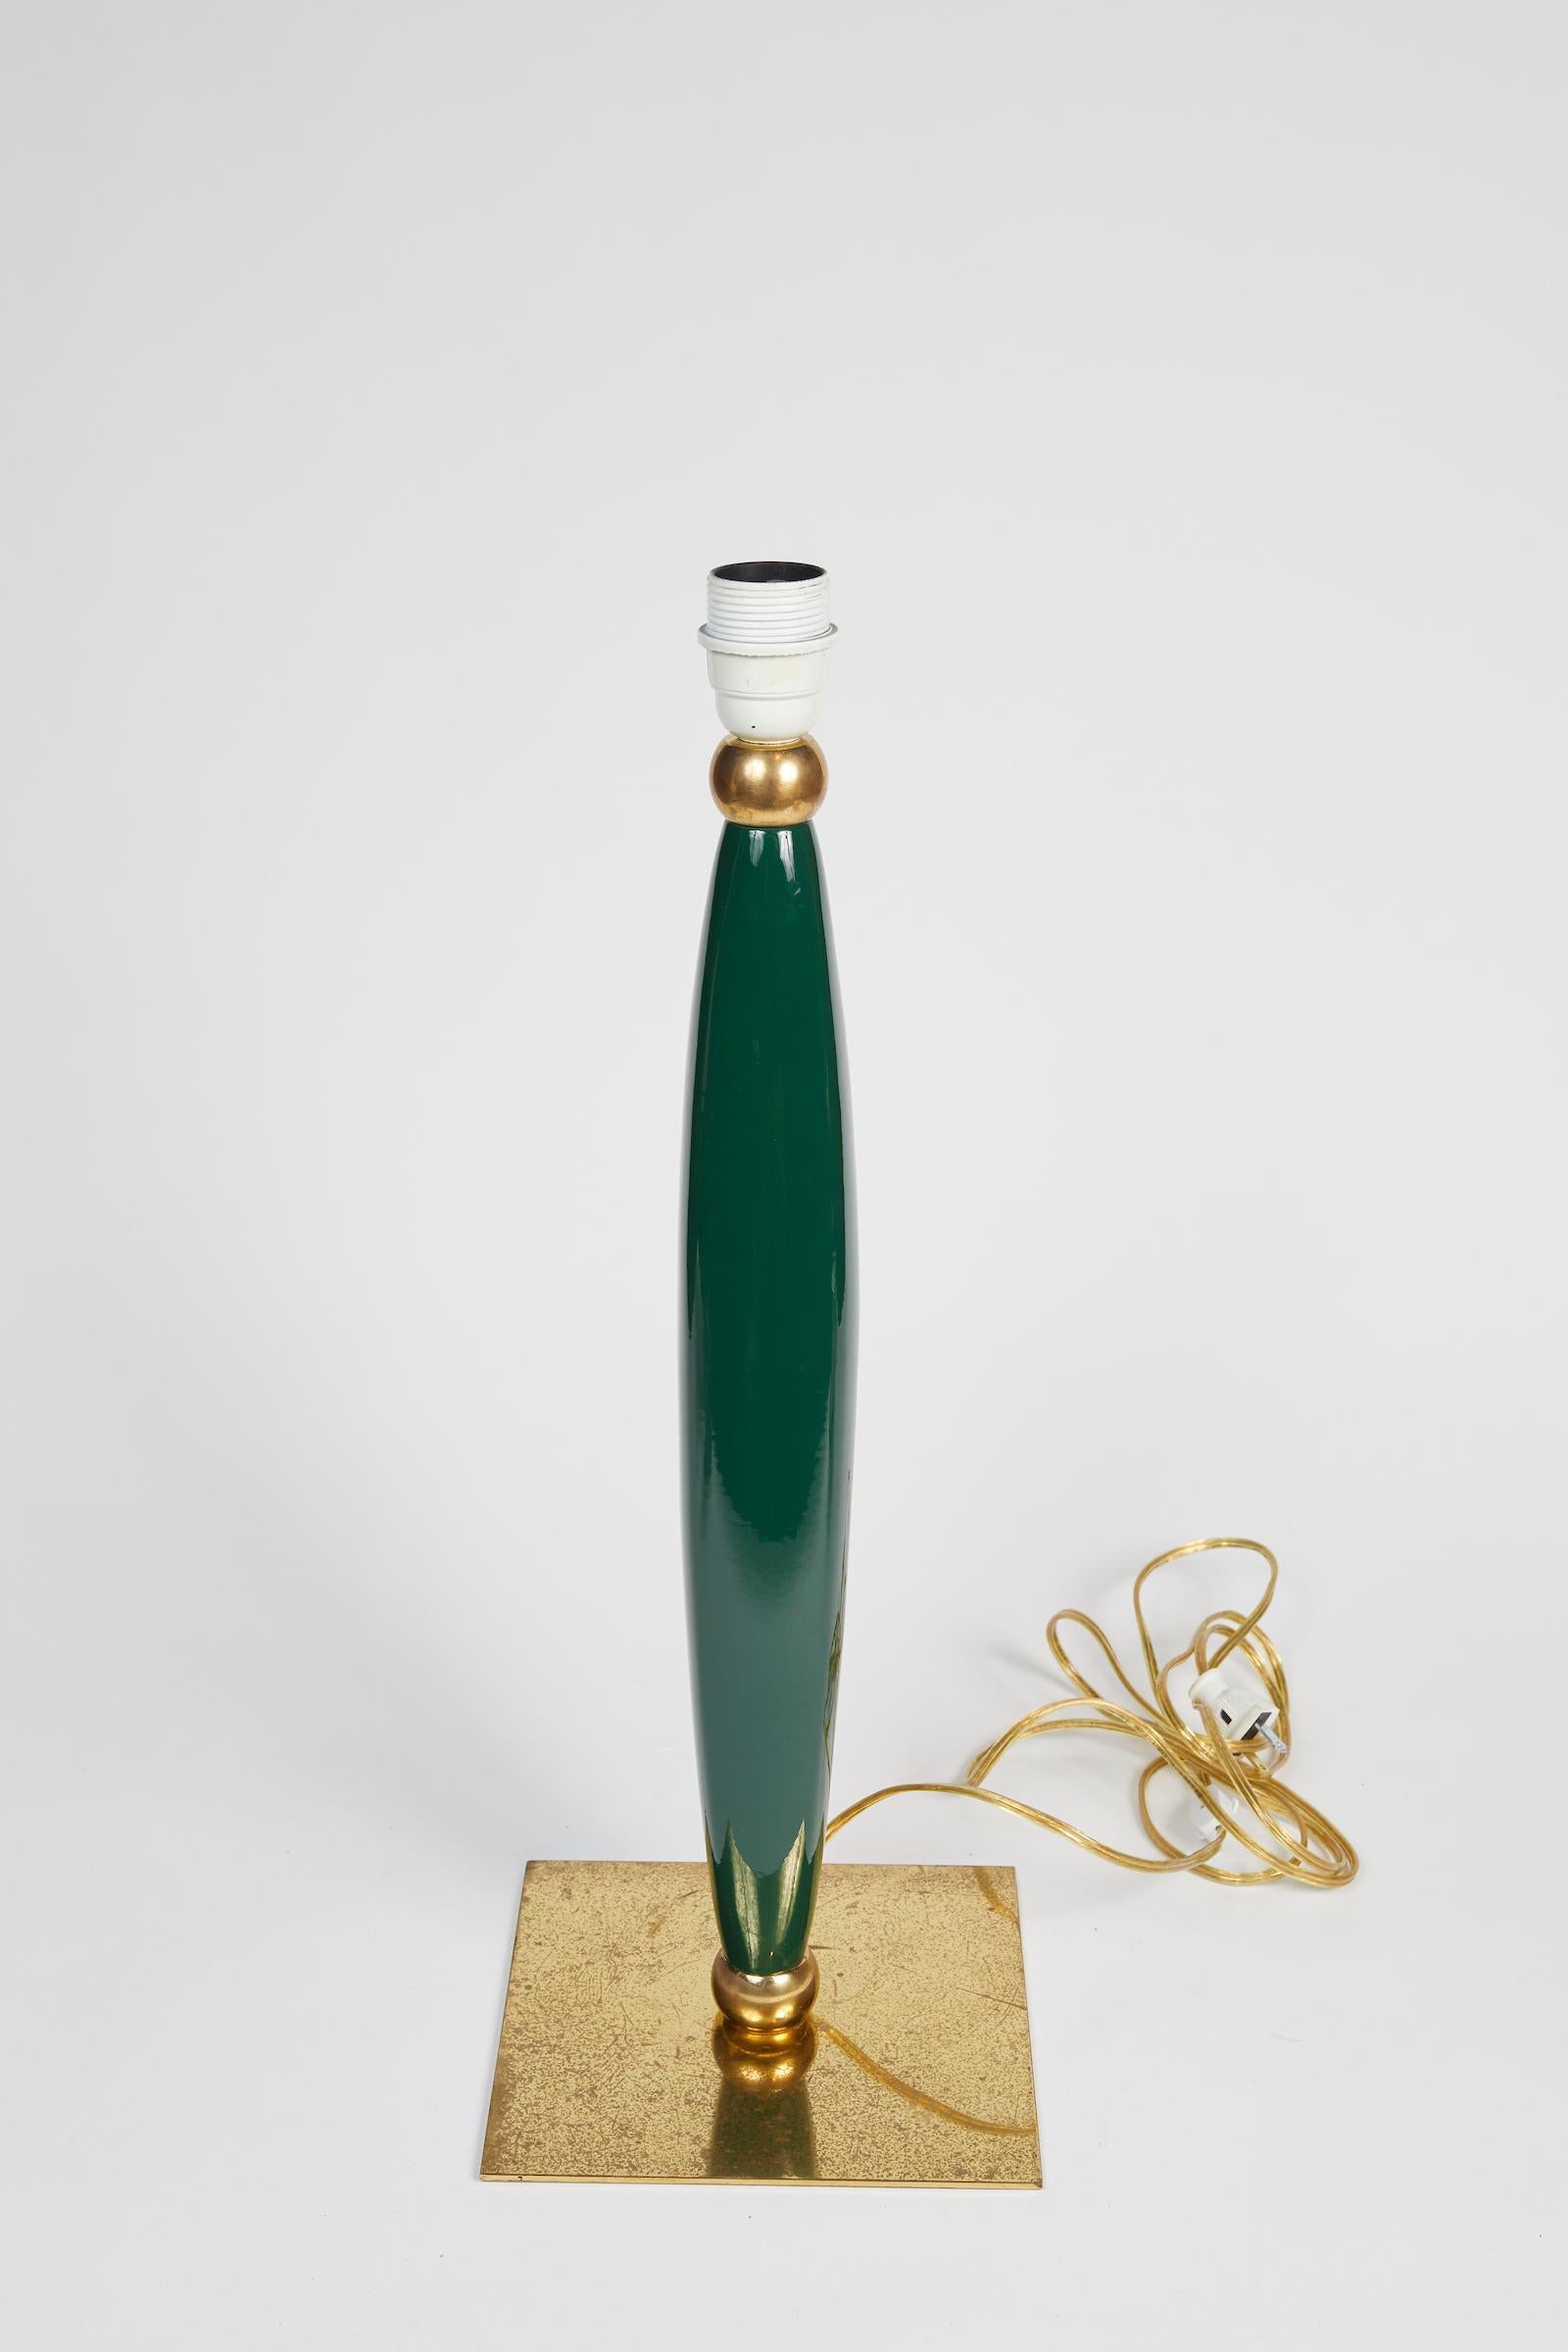 Stylish Ceramic and Brass Table Lamp Designed by Hilton Mcconico 1